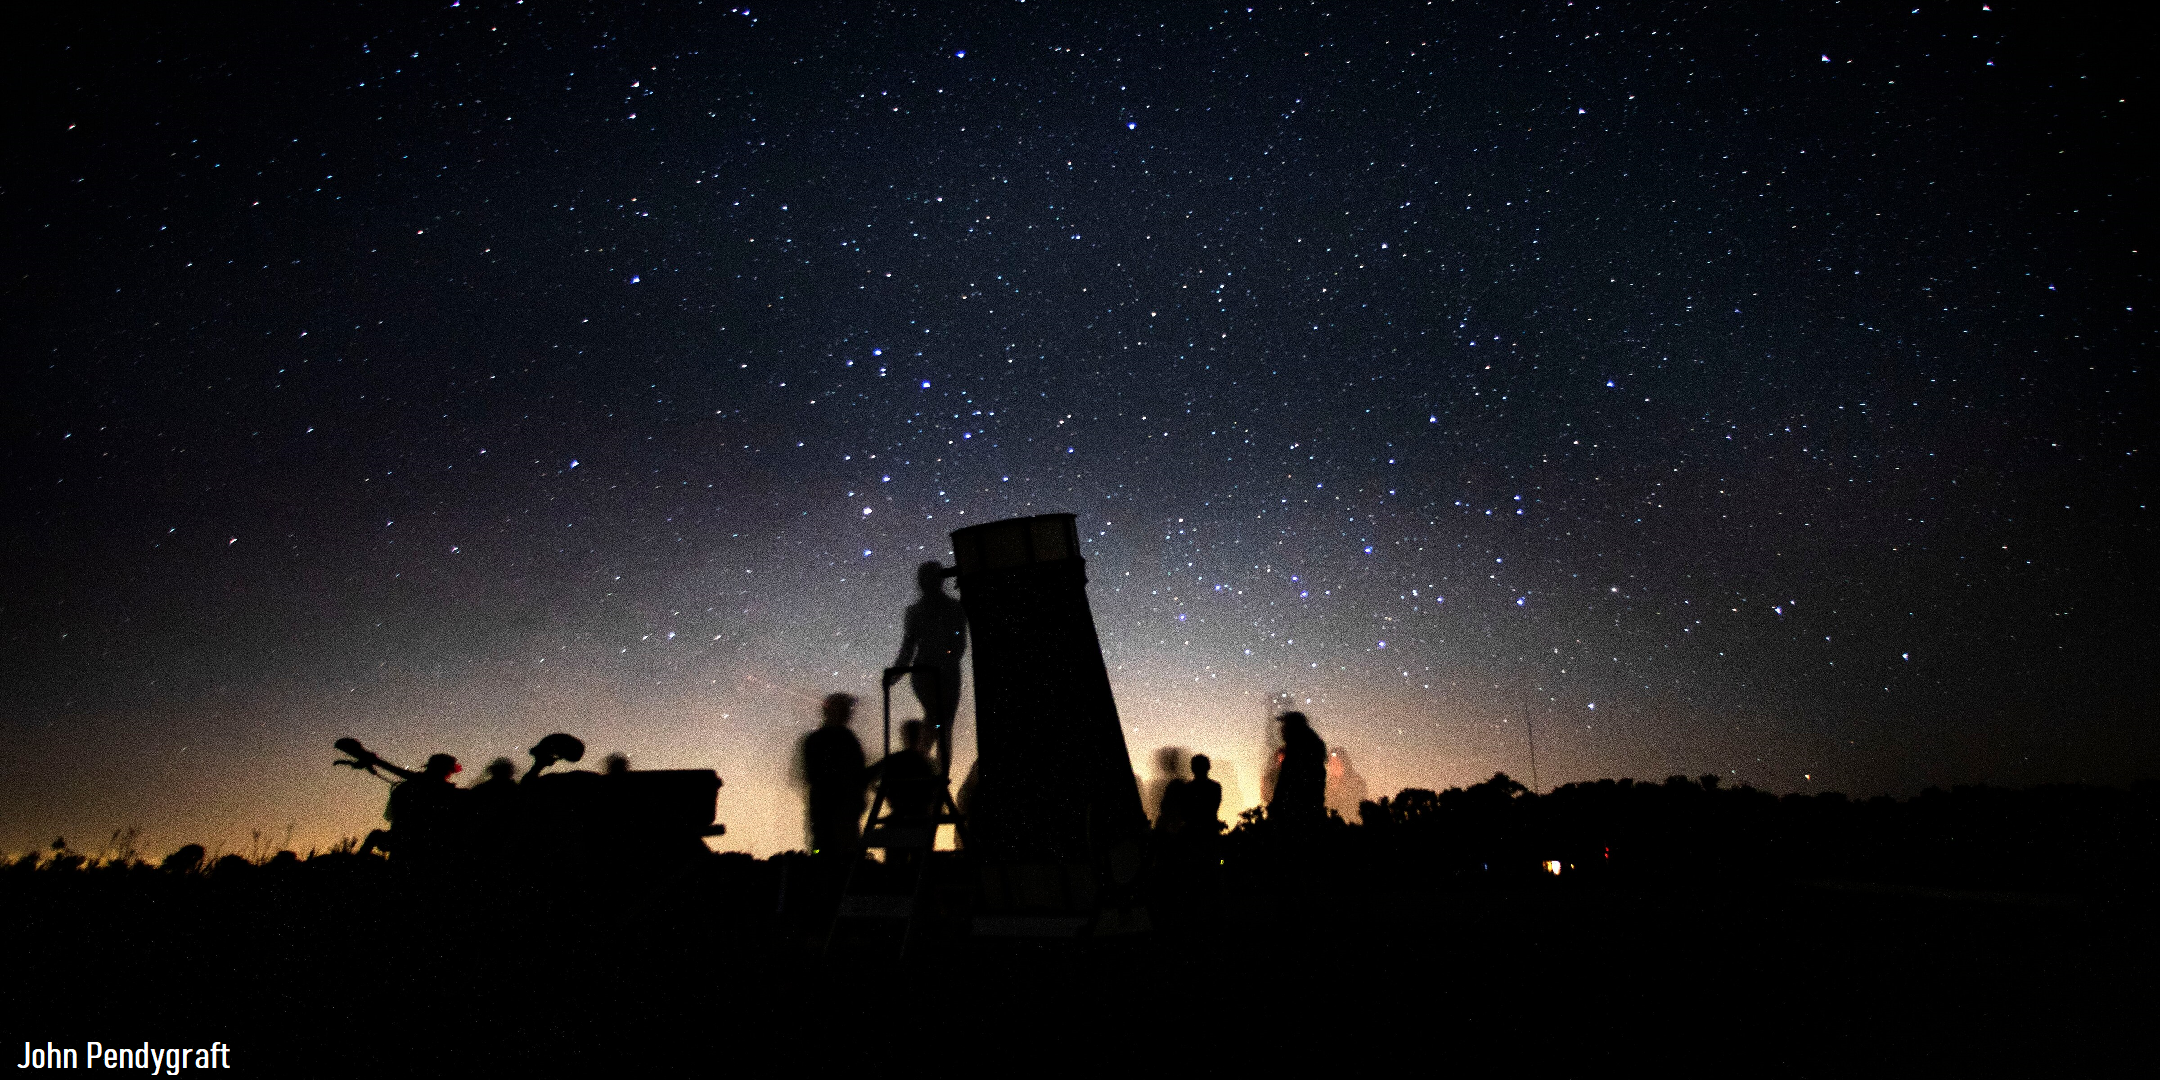 A silhouette of a large telescope and several people against a starry sky with the glow of the horizon behind them